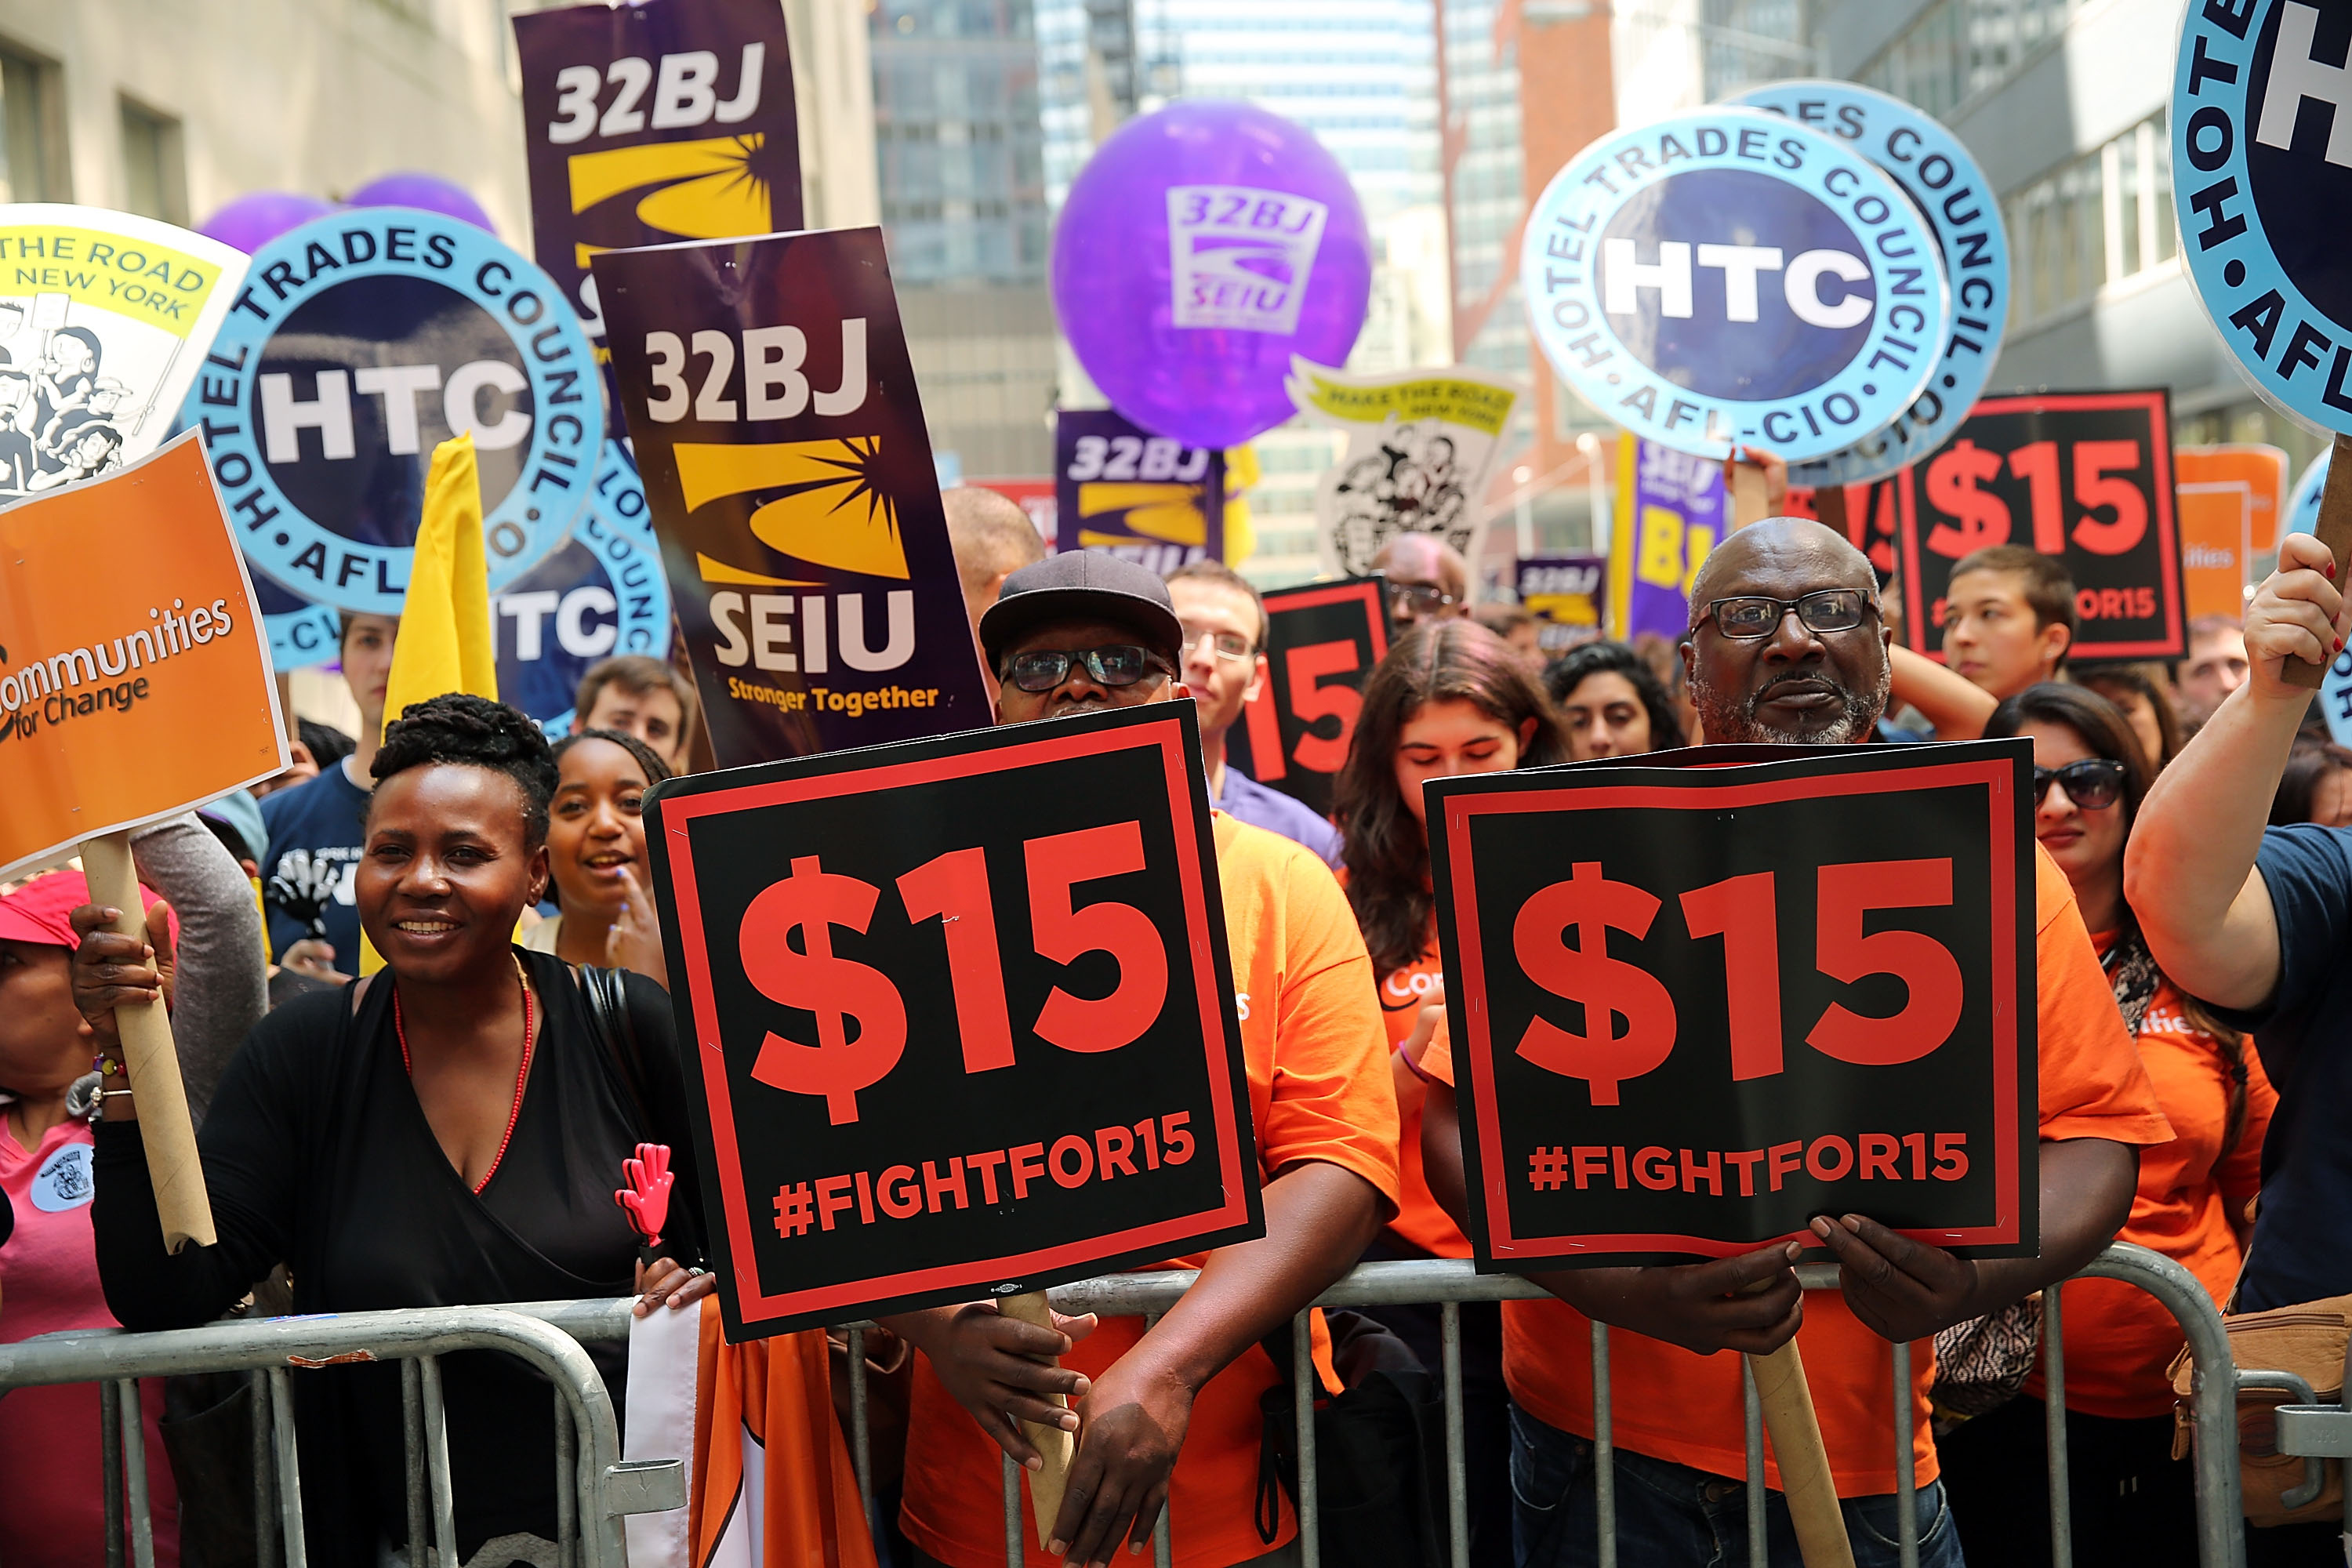 Labor leaders, workers and activists attend  a rally for a $15 minimum hourly wage on July 22, 2015 in New York City. (Spencer Platt&mdash;Getty Images)